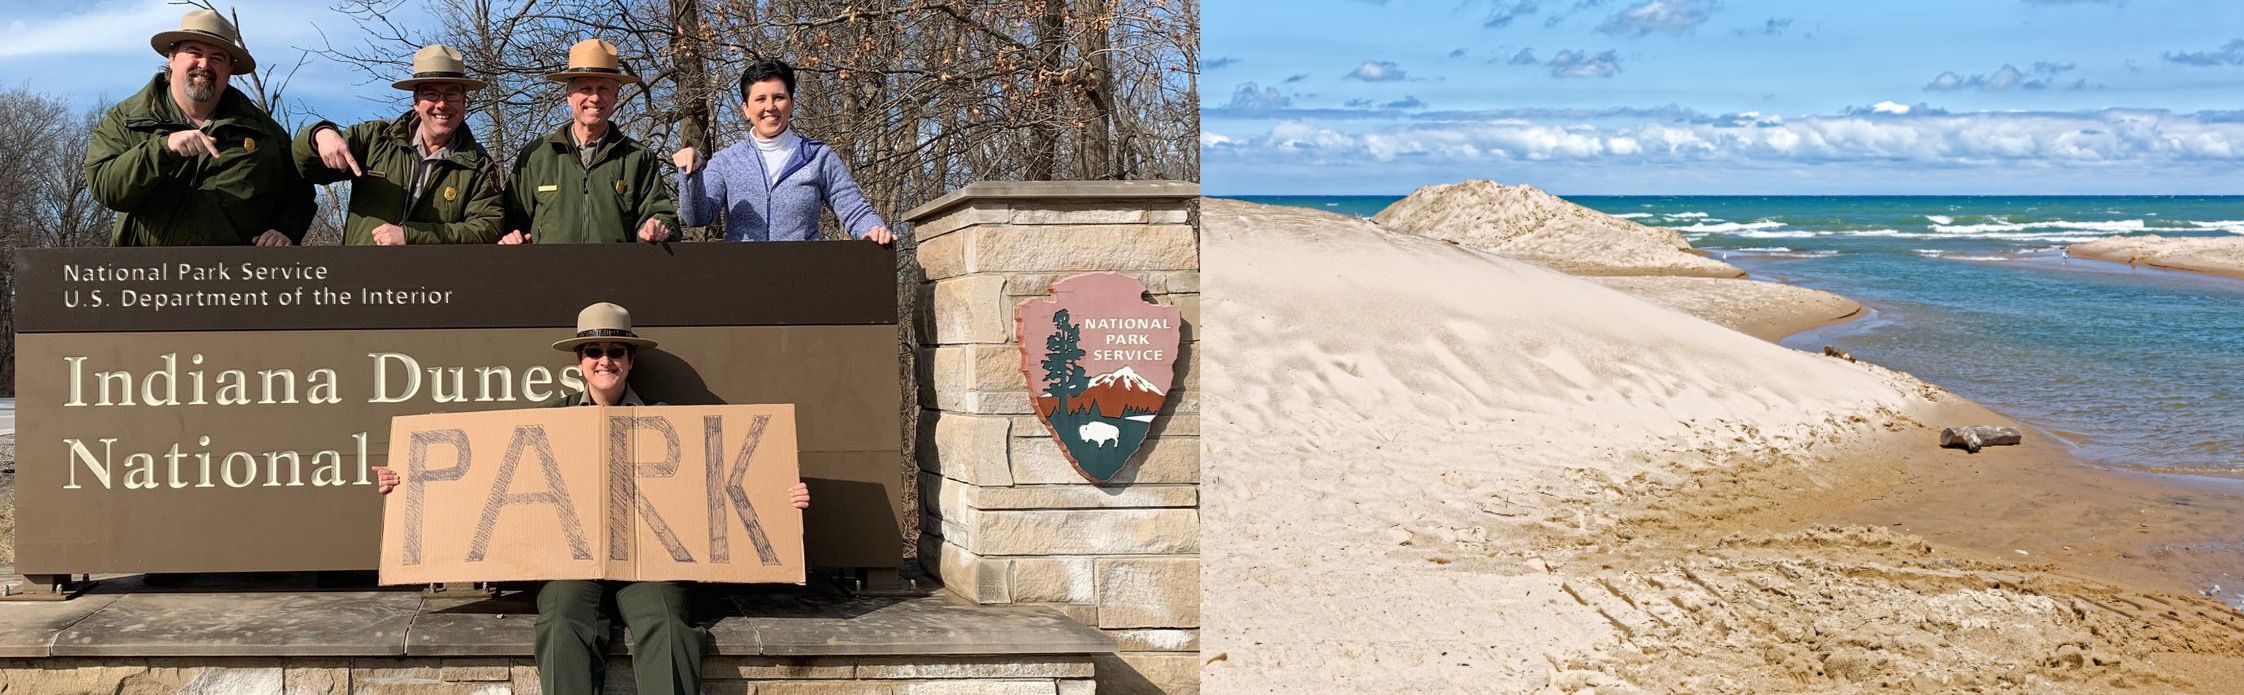 (left) park rangers in front of a sign for indiana dunes holding up a homemade sign that says PARK (right) image of a sandy shoreline at lake michigan